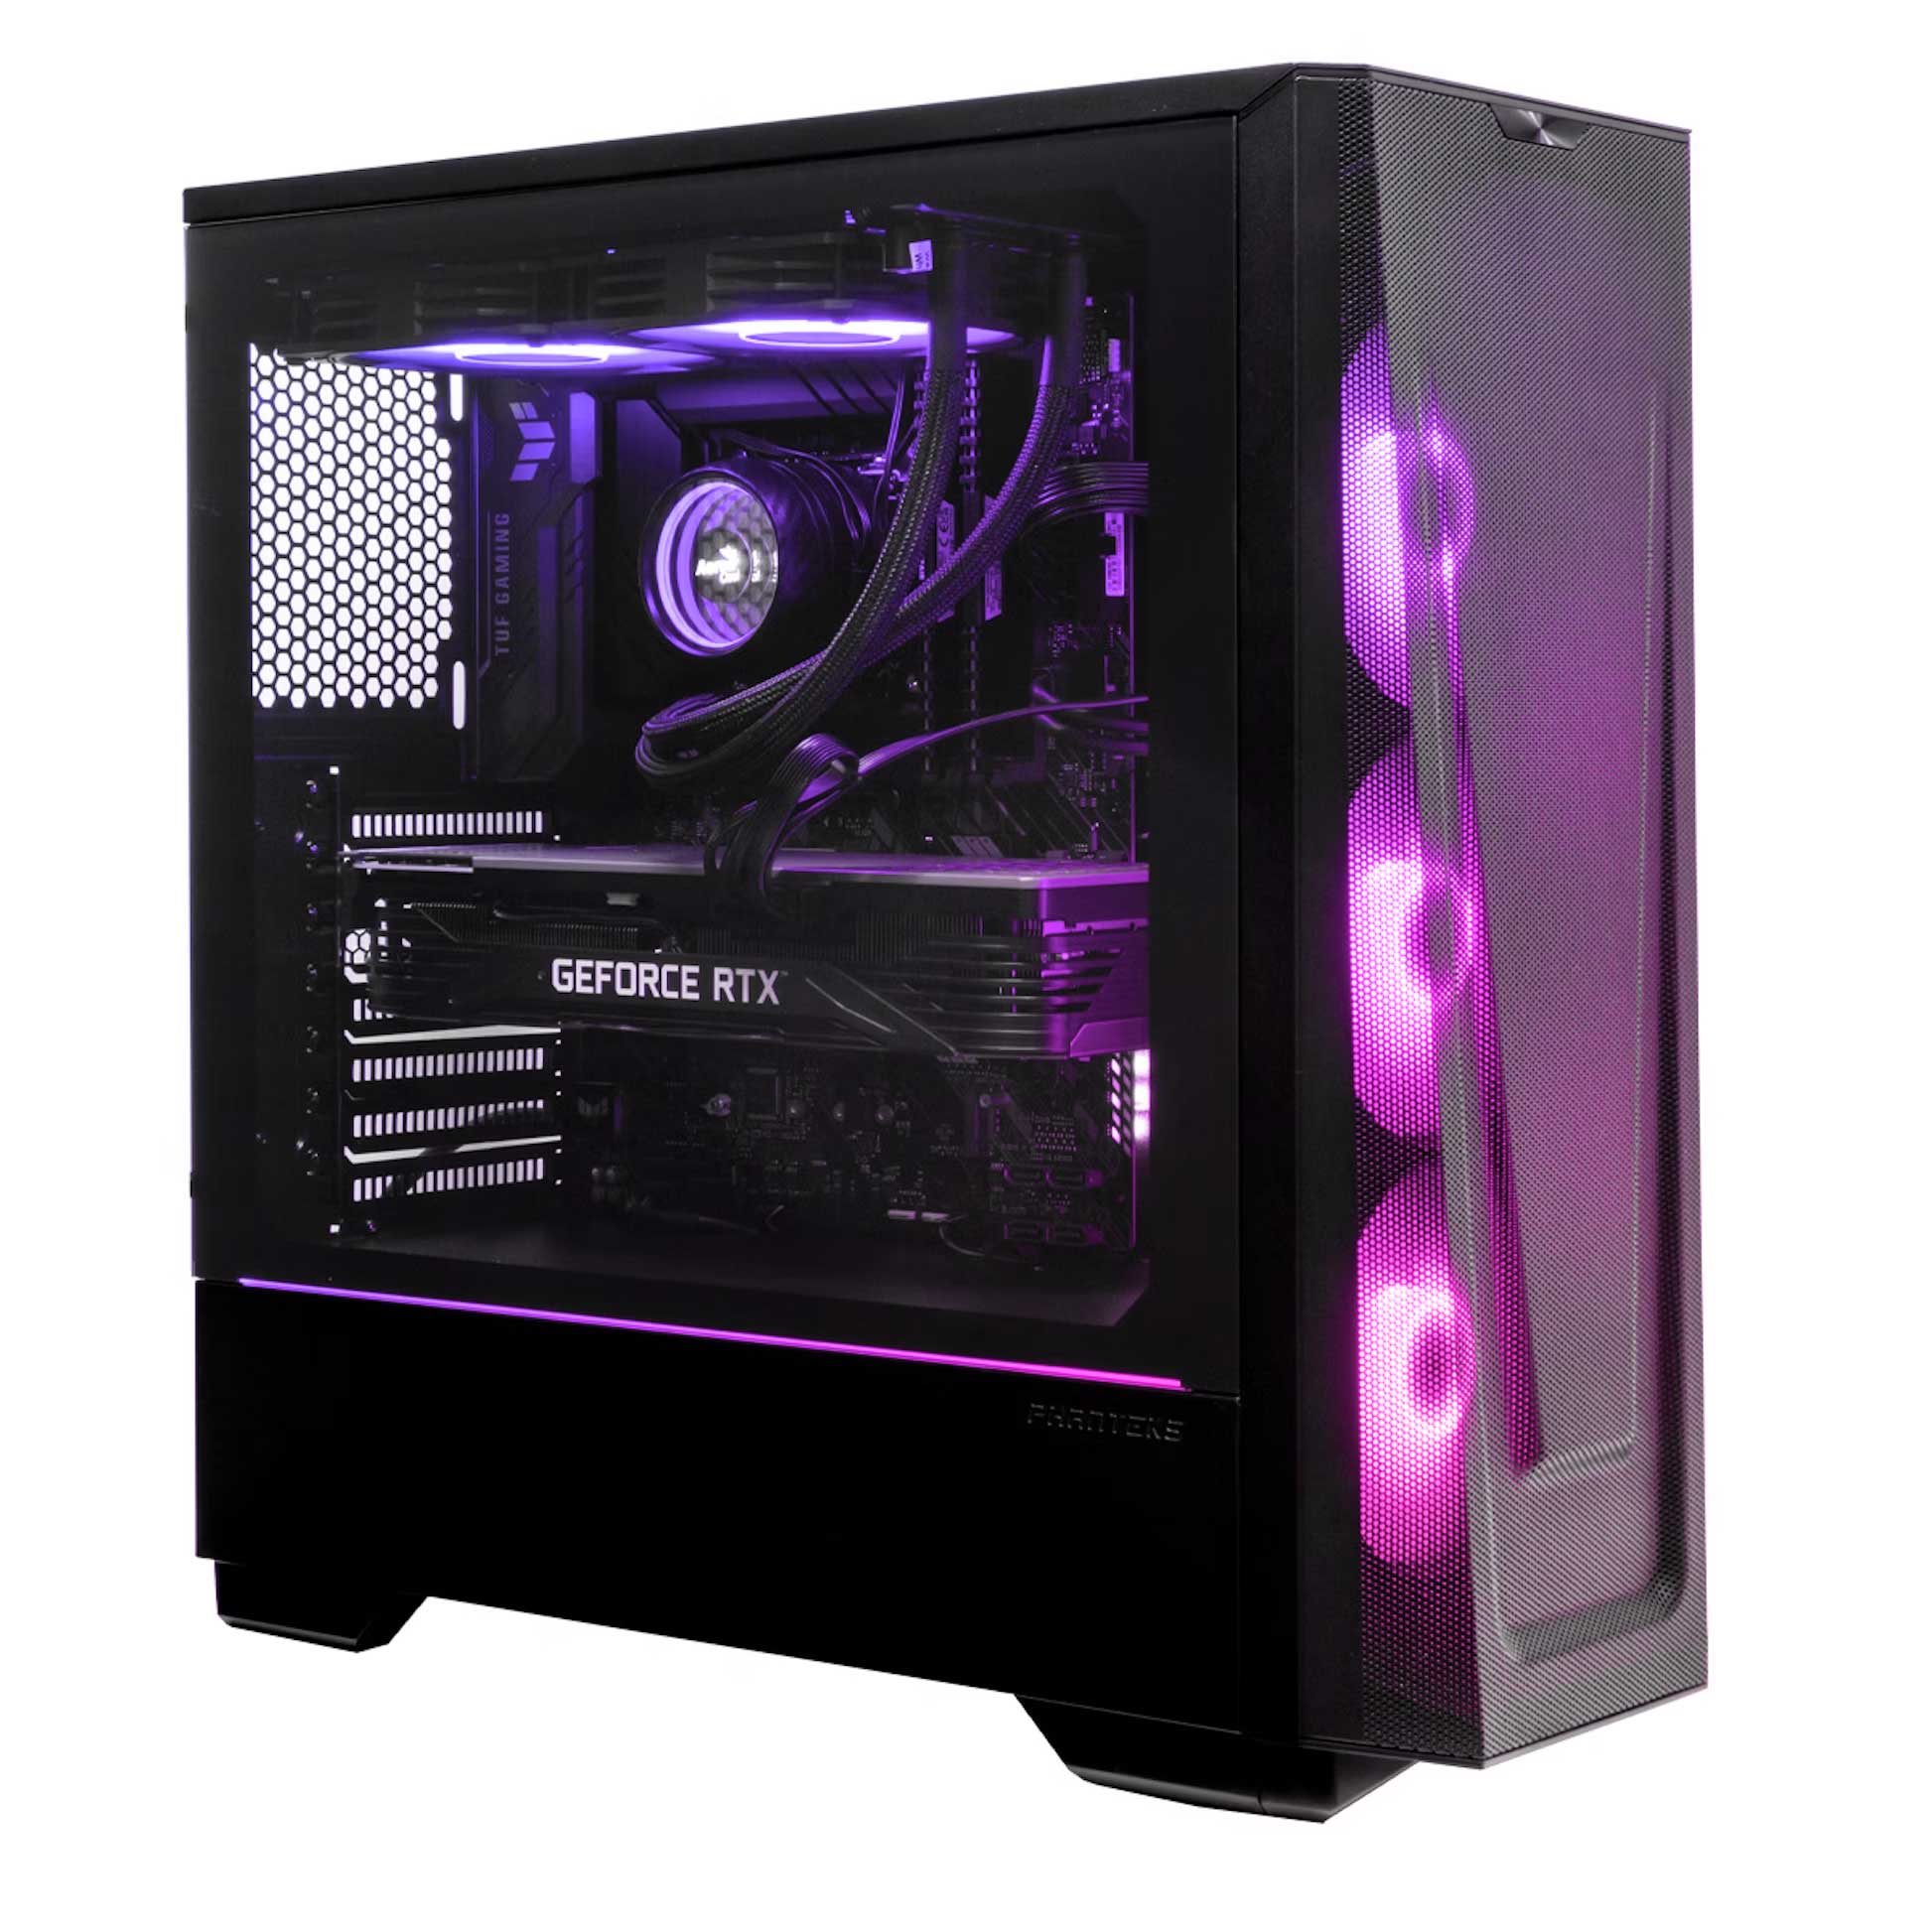 Pick your favorite PC parts, create a dream PC Build, and Win 1 of